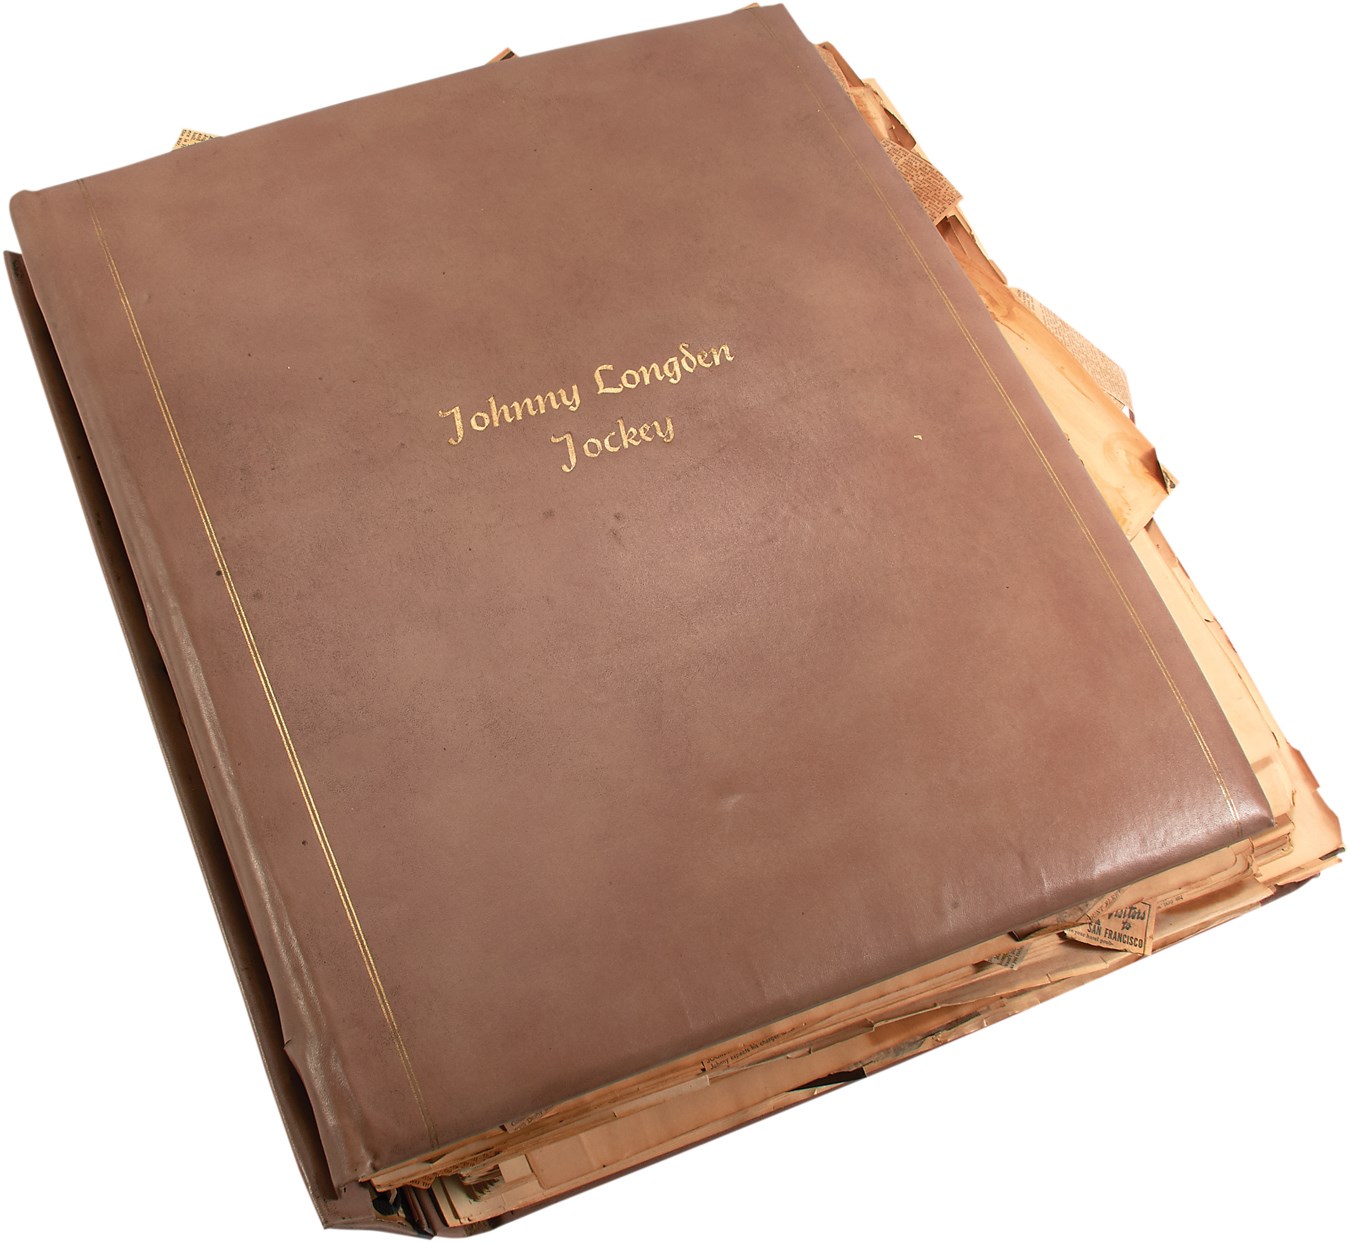 Johnny Longden's Personal Hall of Fame Scrapbook (57lbs.)